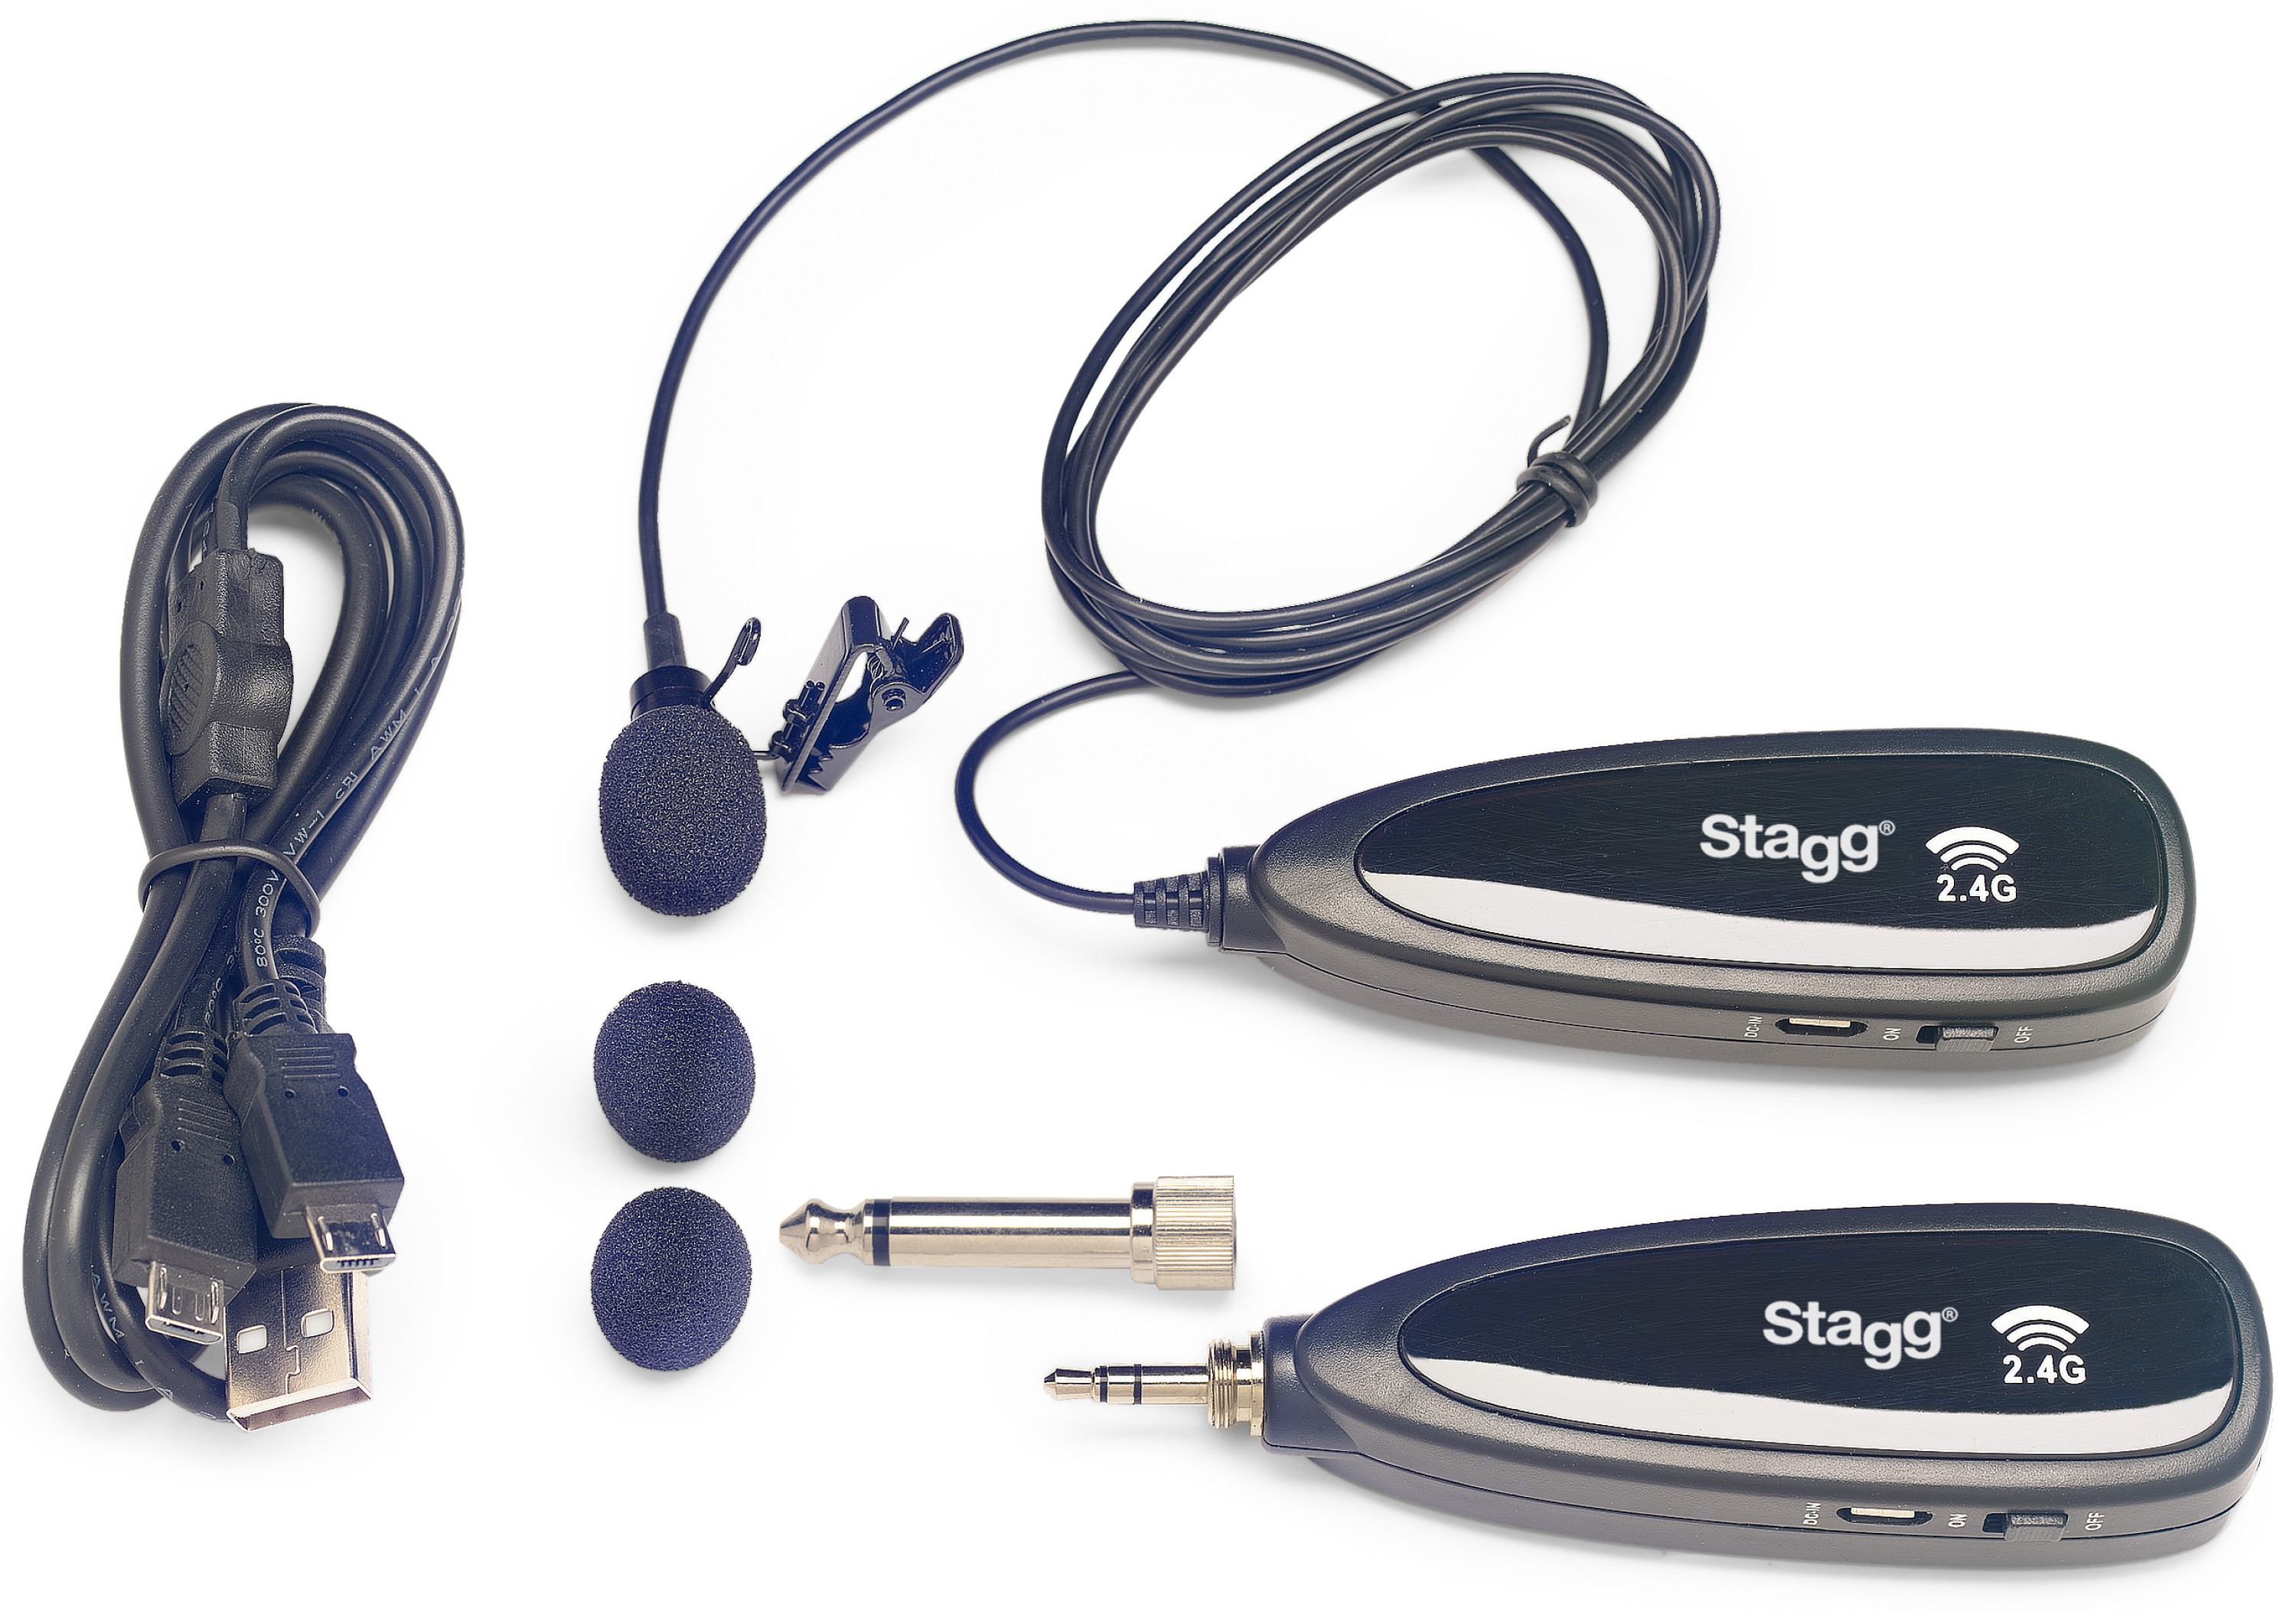 Stagg Wireless Lavalier Microphone Set